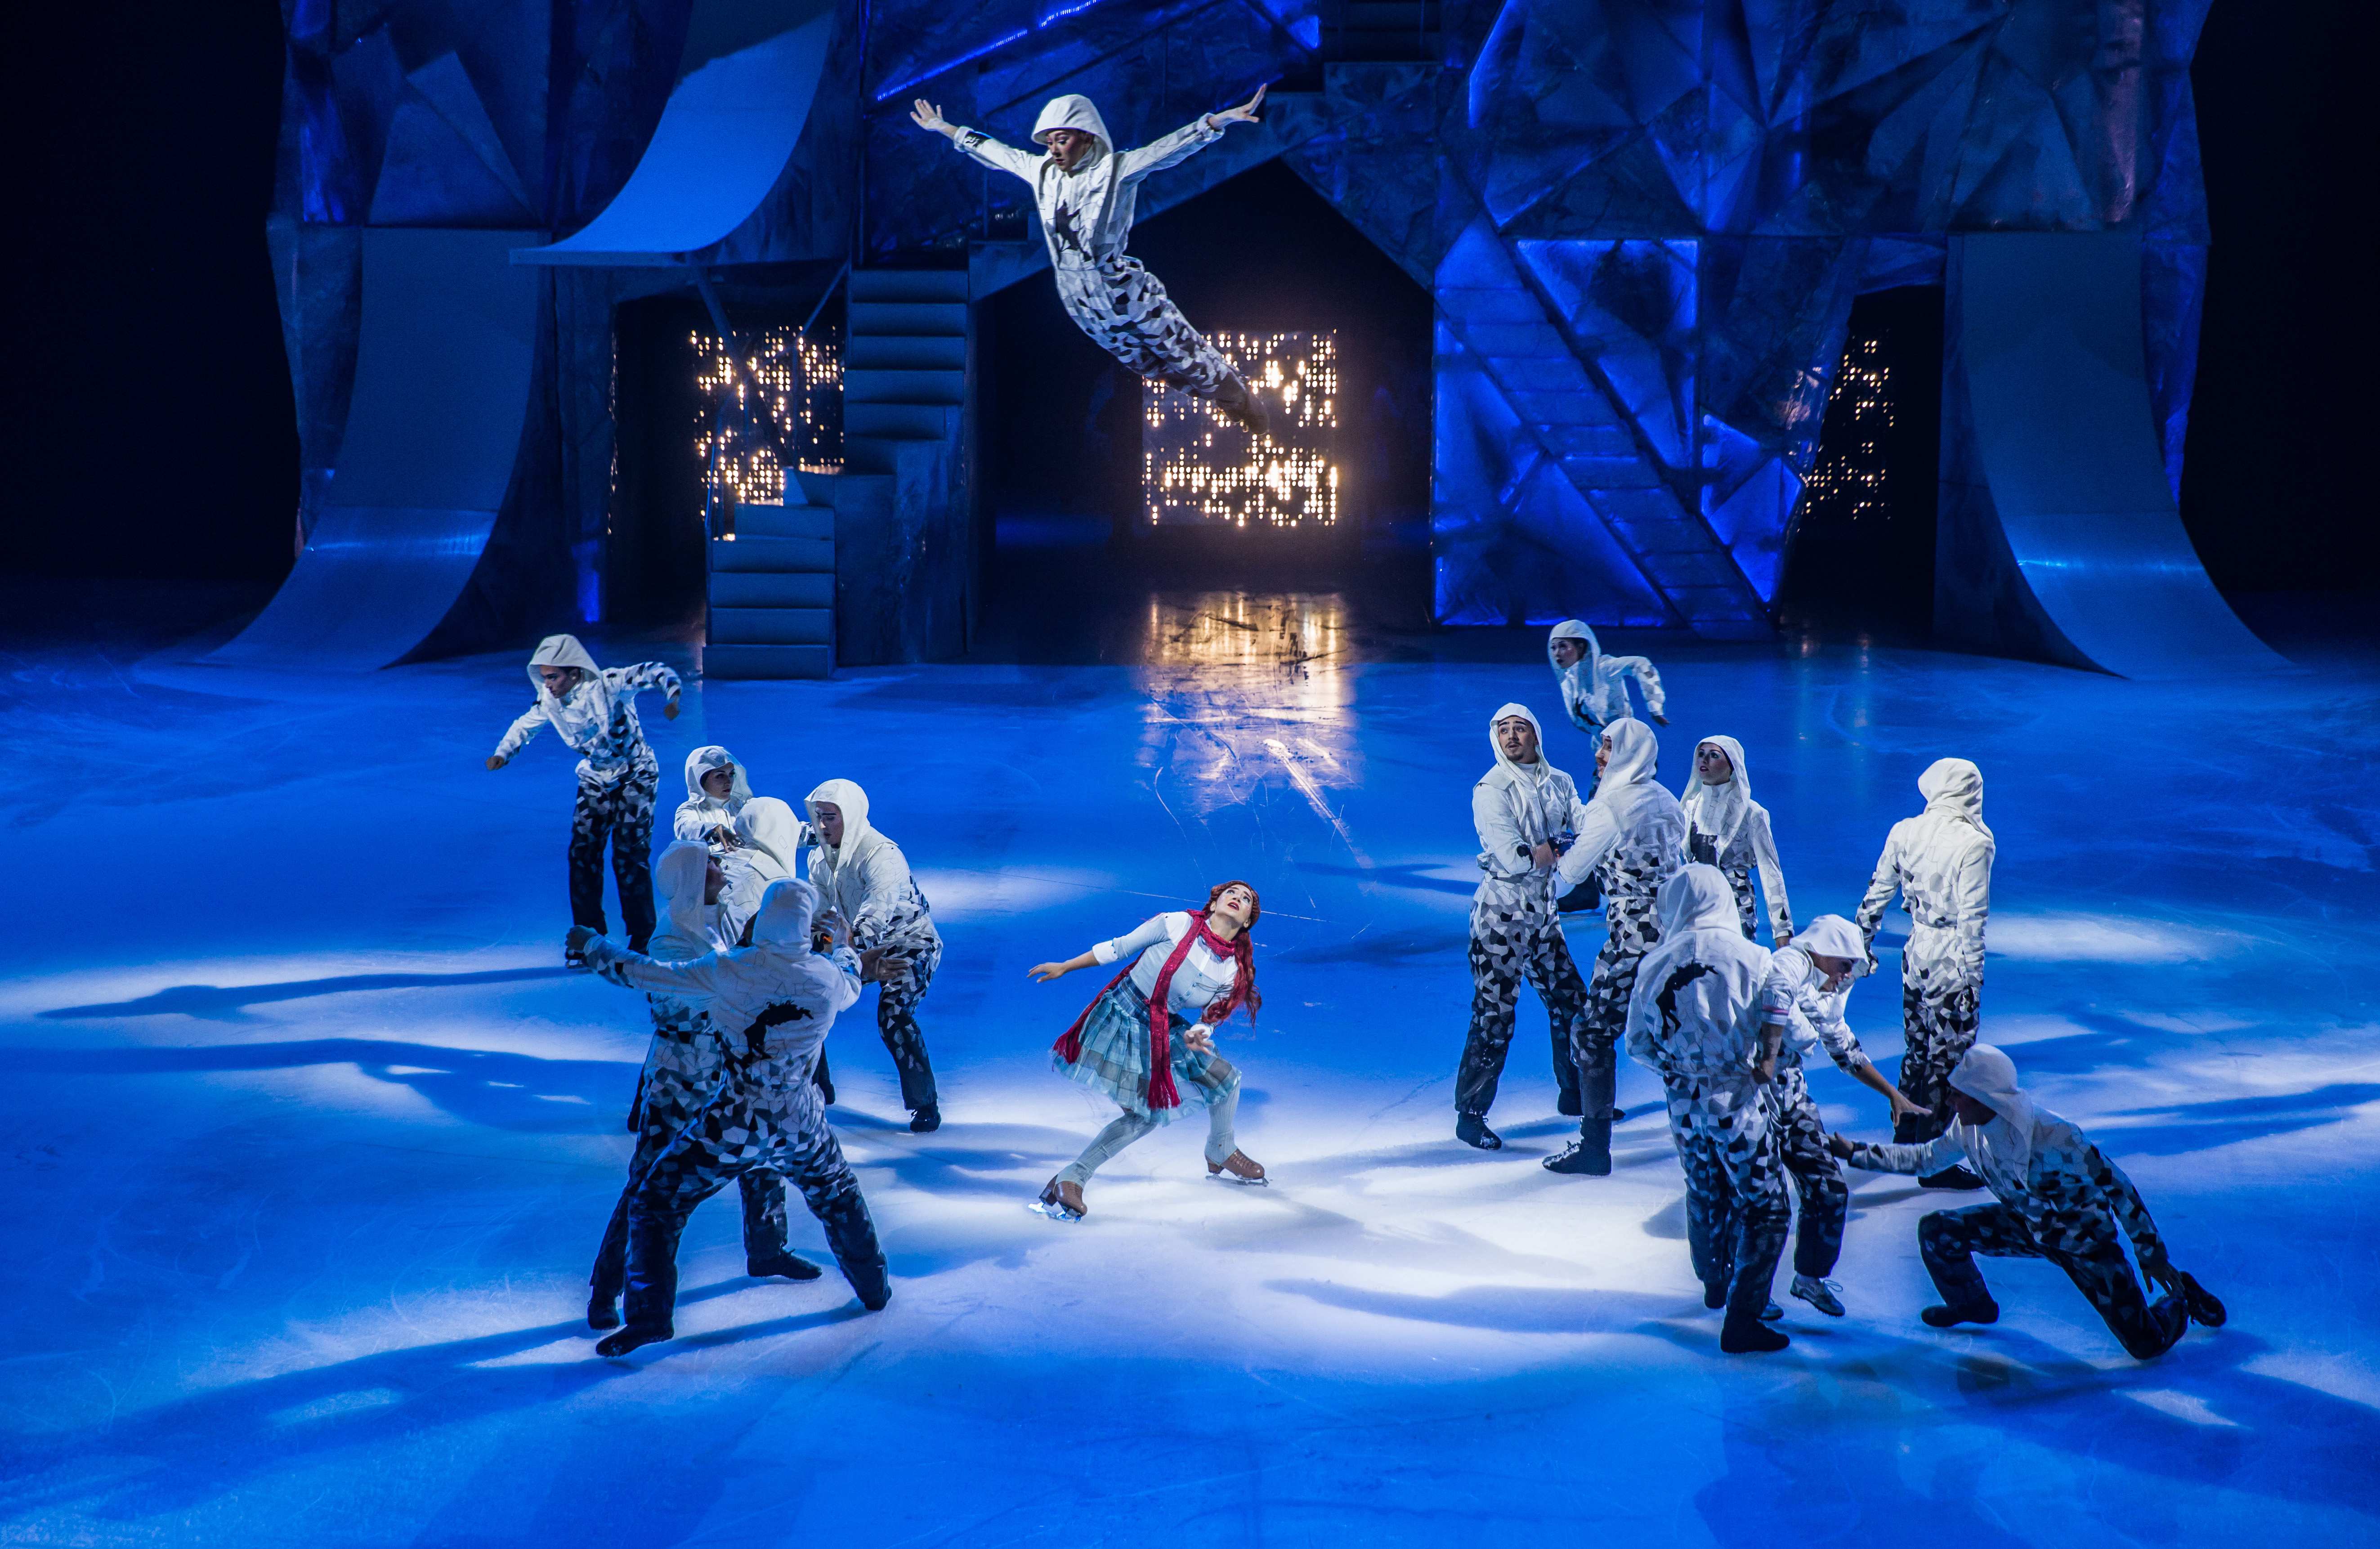 Cirque du Soleil's ice show 'CRYSTAL' is coming to Belfast this spring!